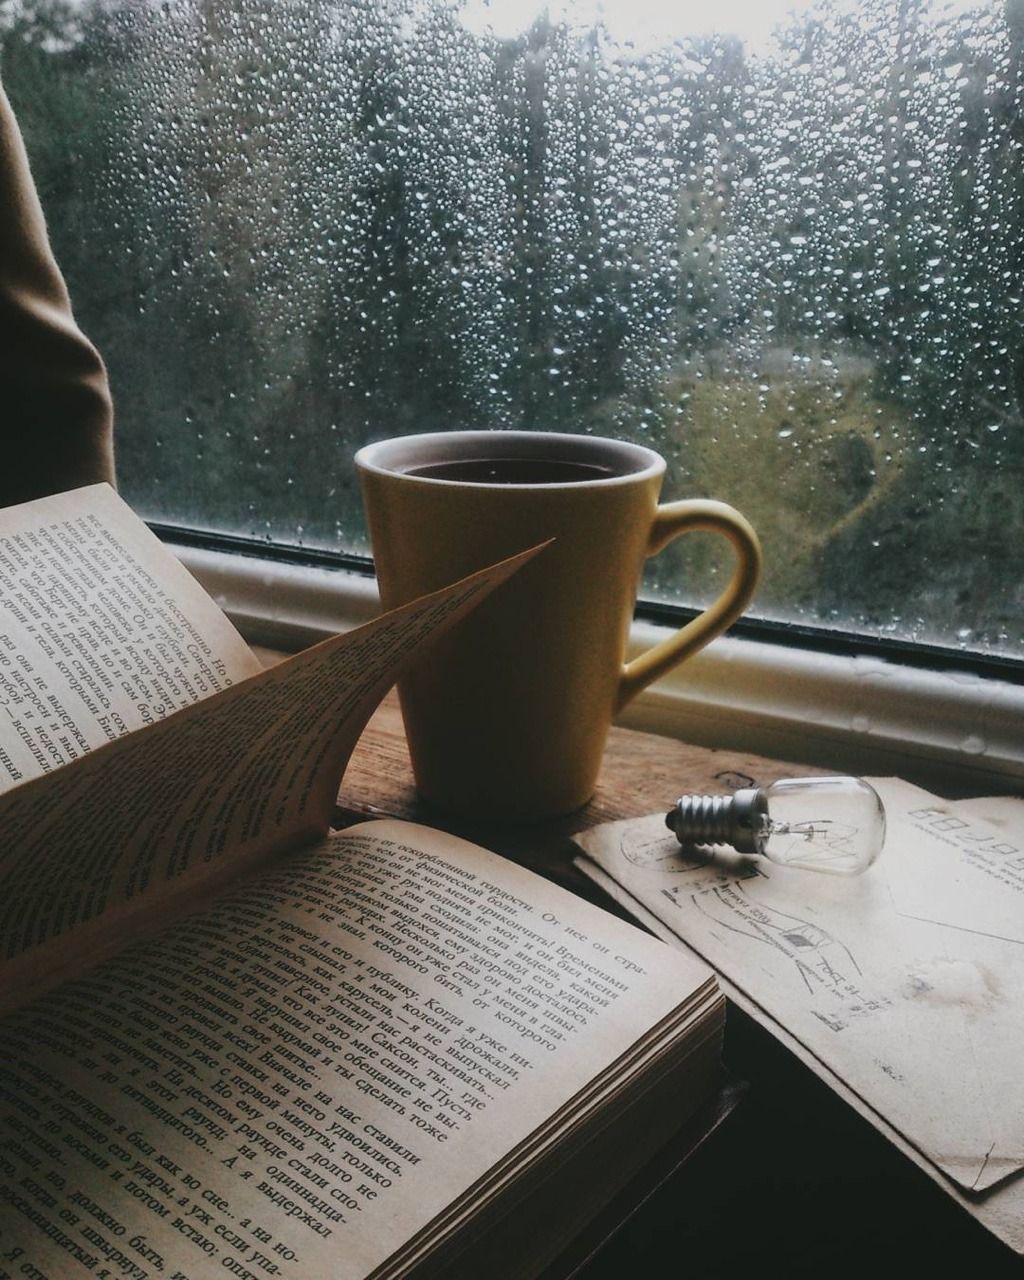 Nothing better than rainy days enjoyed with a hot cup of coffee. Rainy day photography, Coffee and books, Rain wallpaper